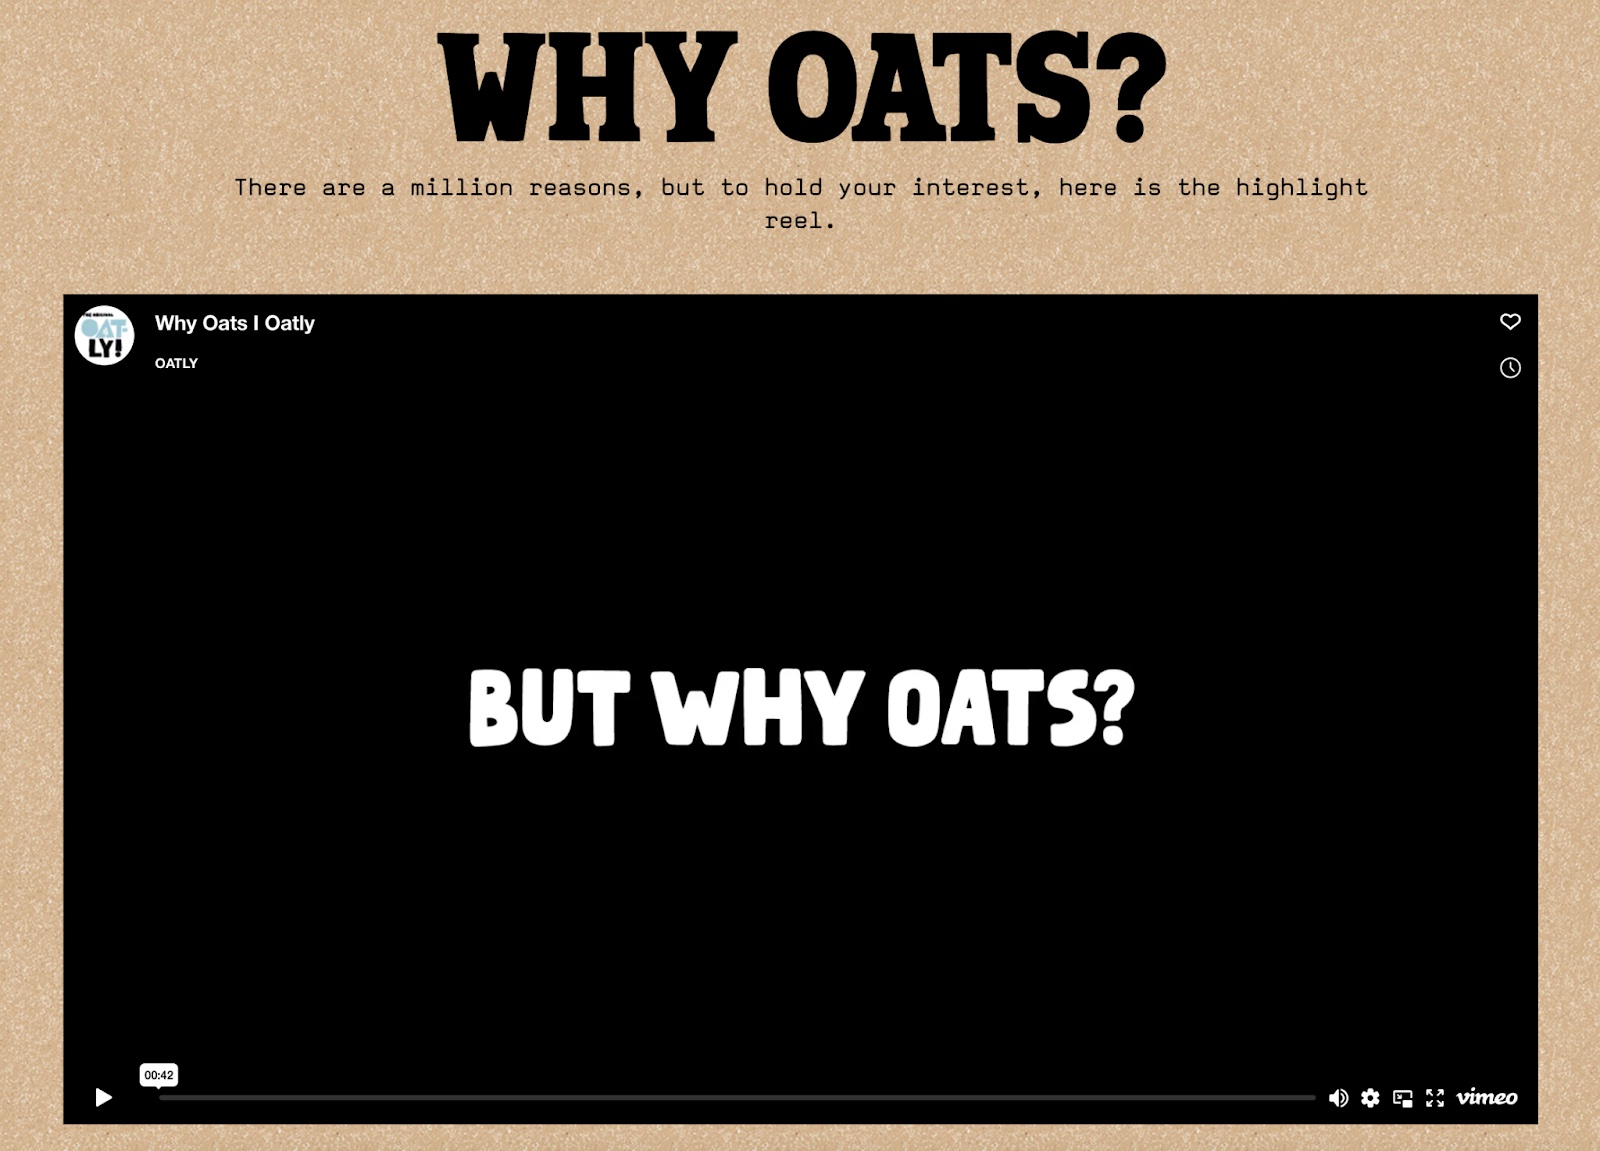 Oatly's “Why Oats?” section of the site